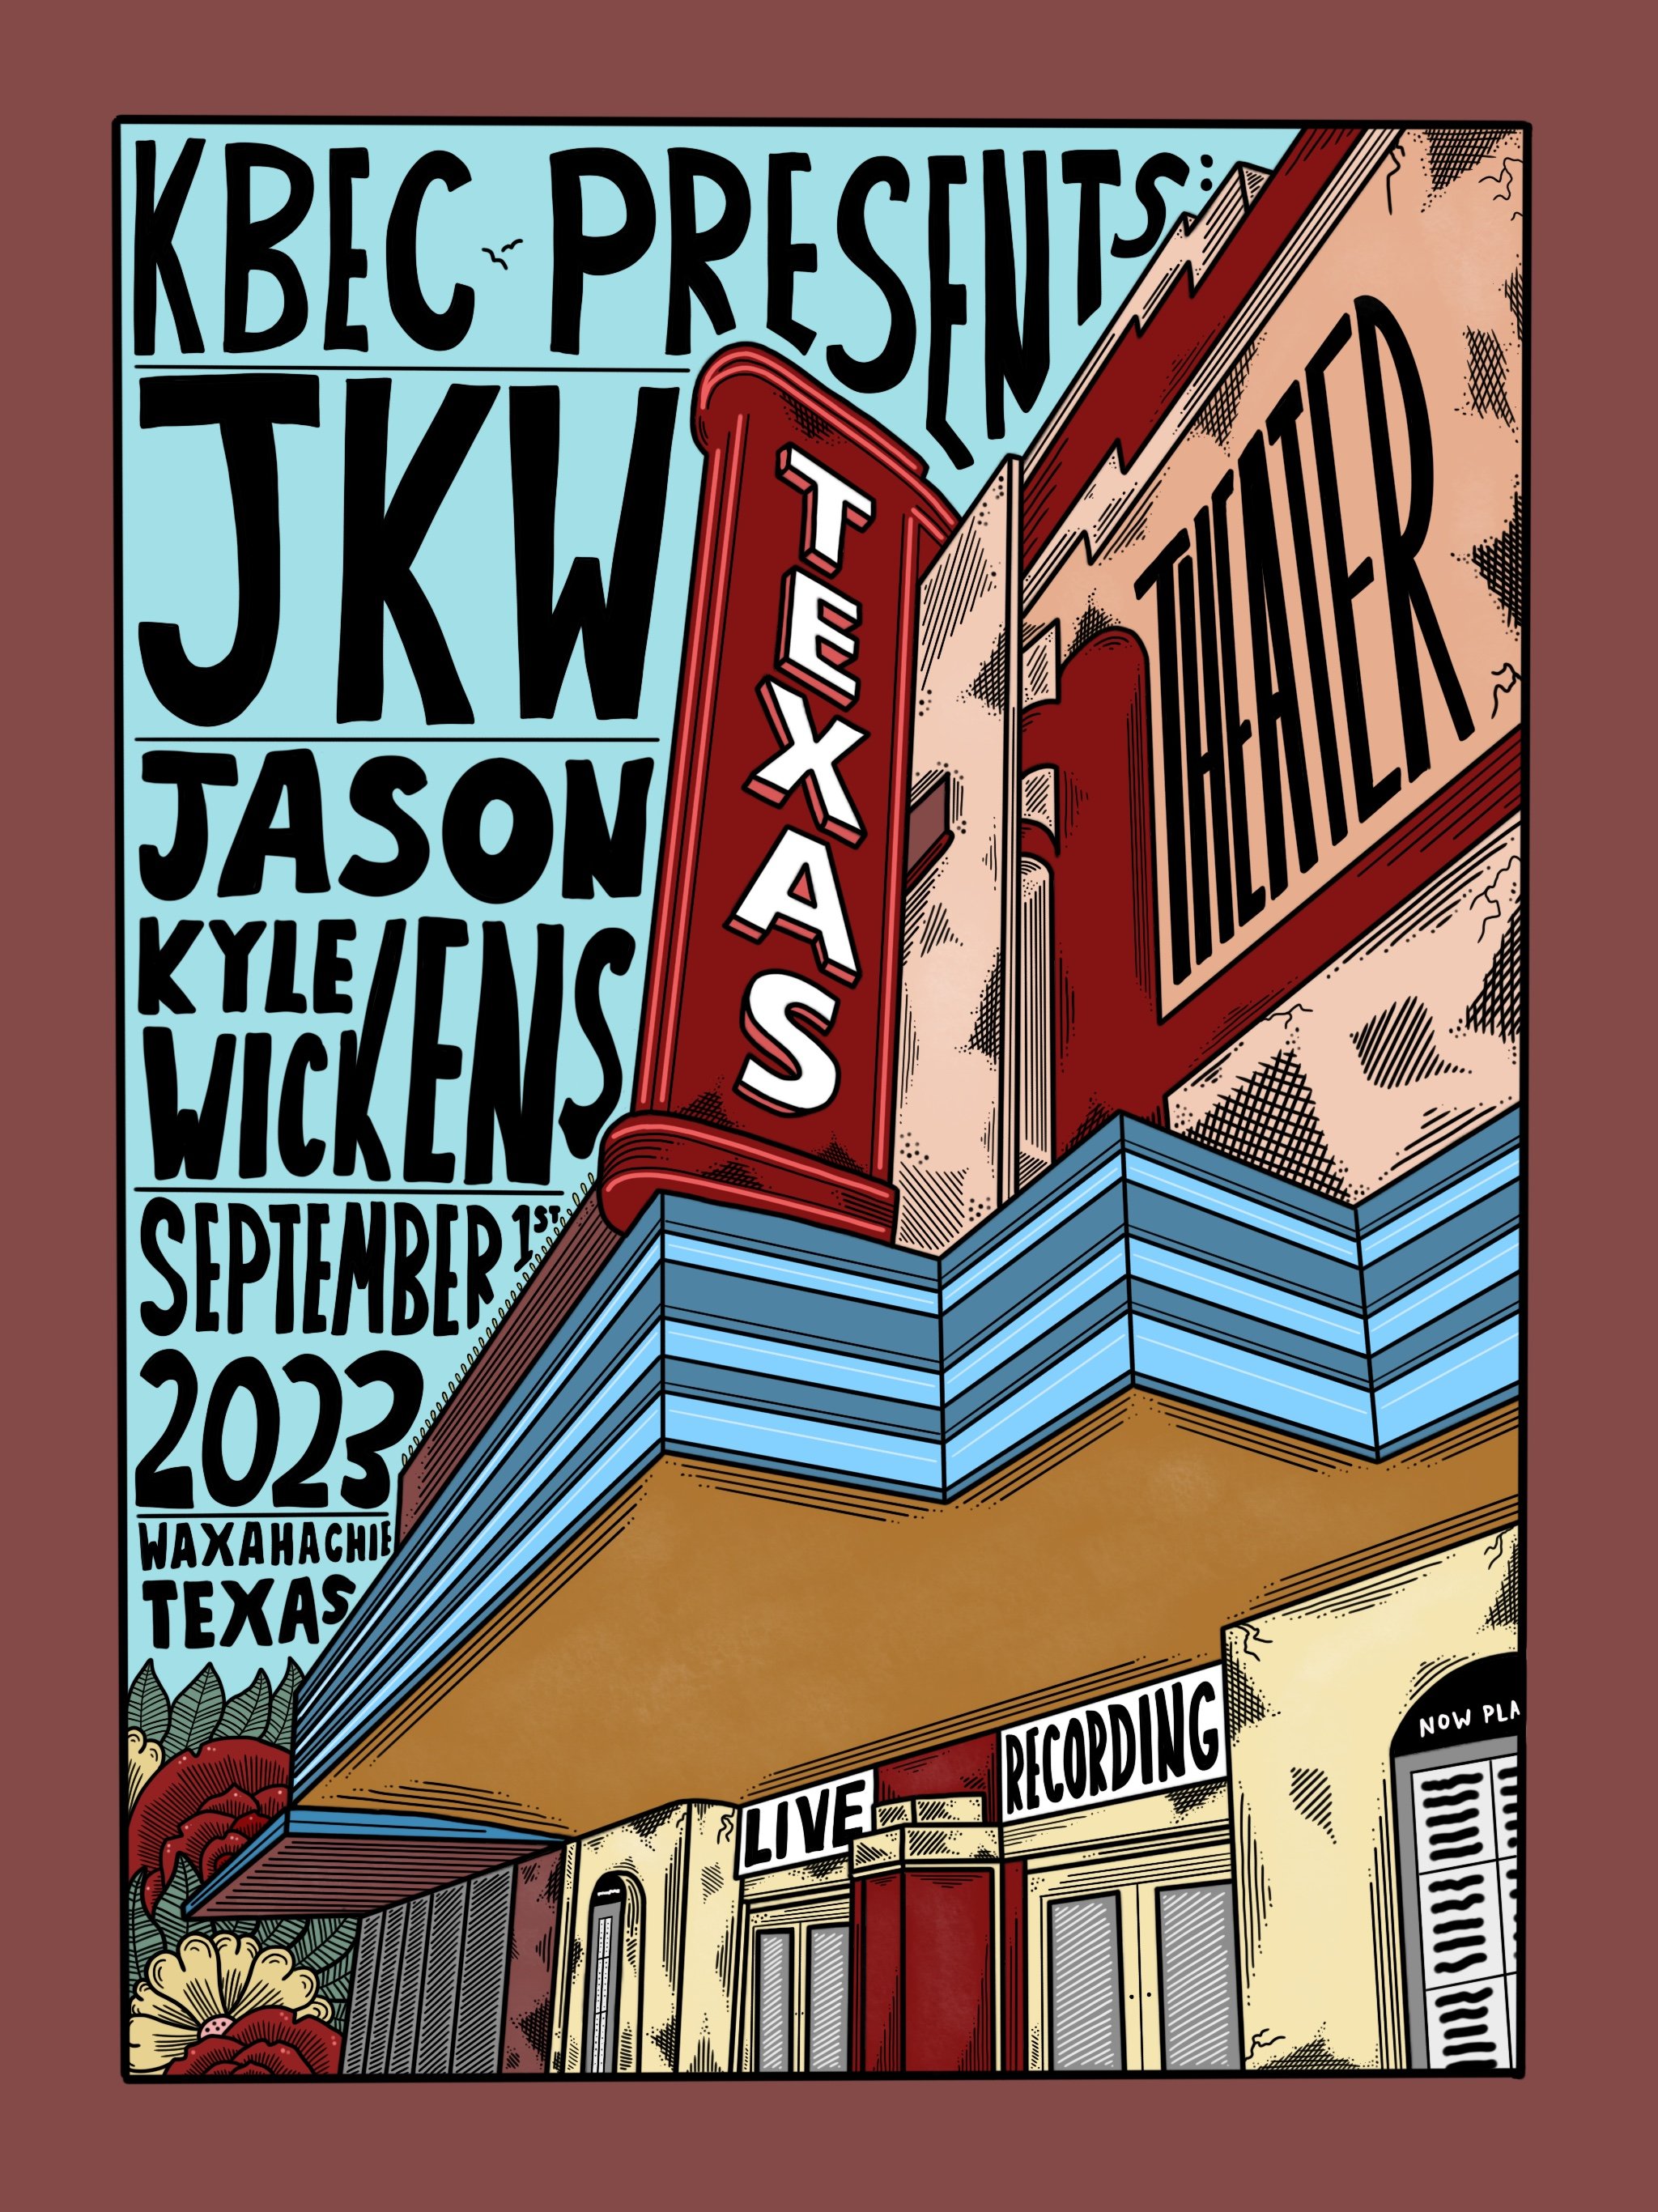 Jason Kyle Wickens "Texas Theater" Show Poster